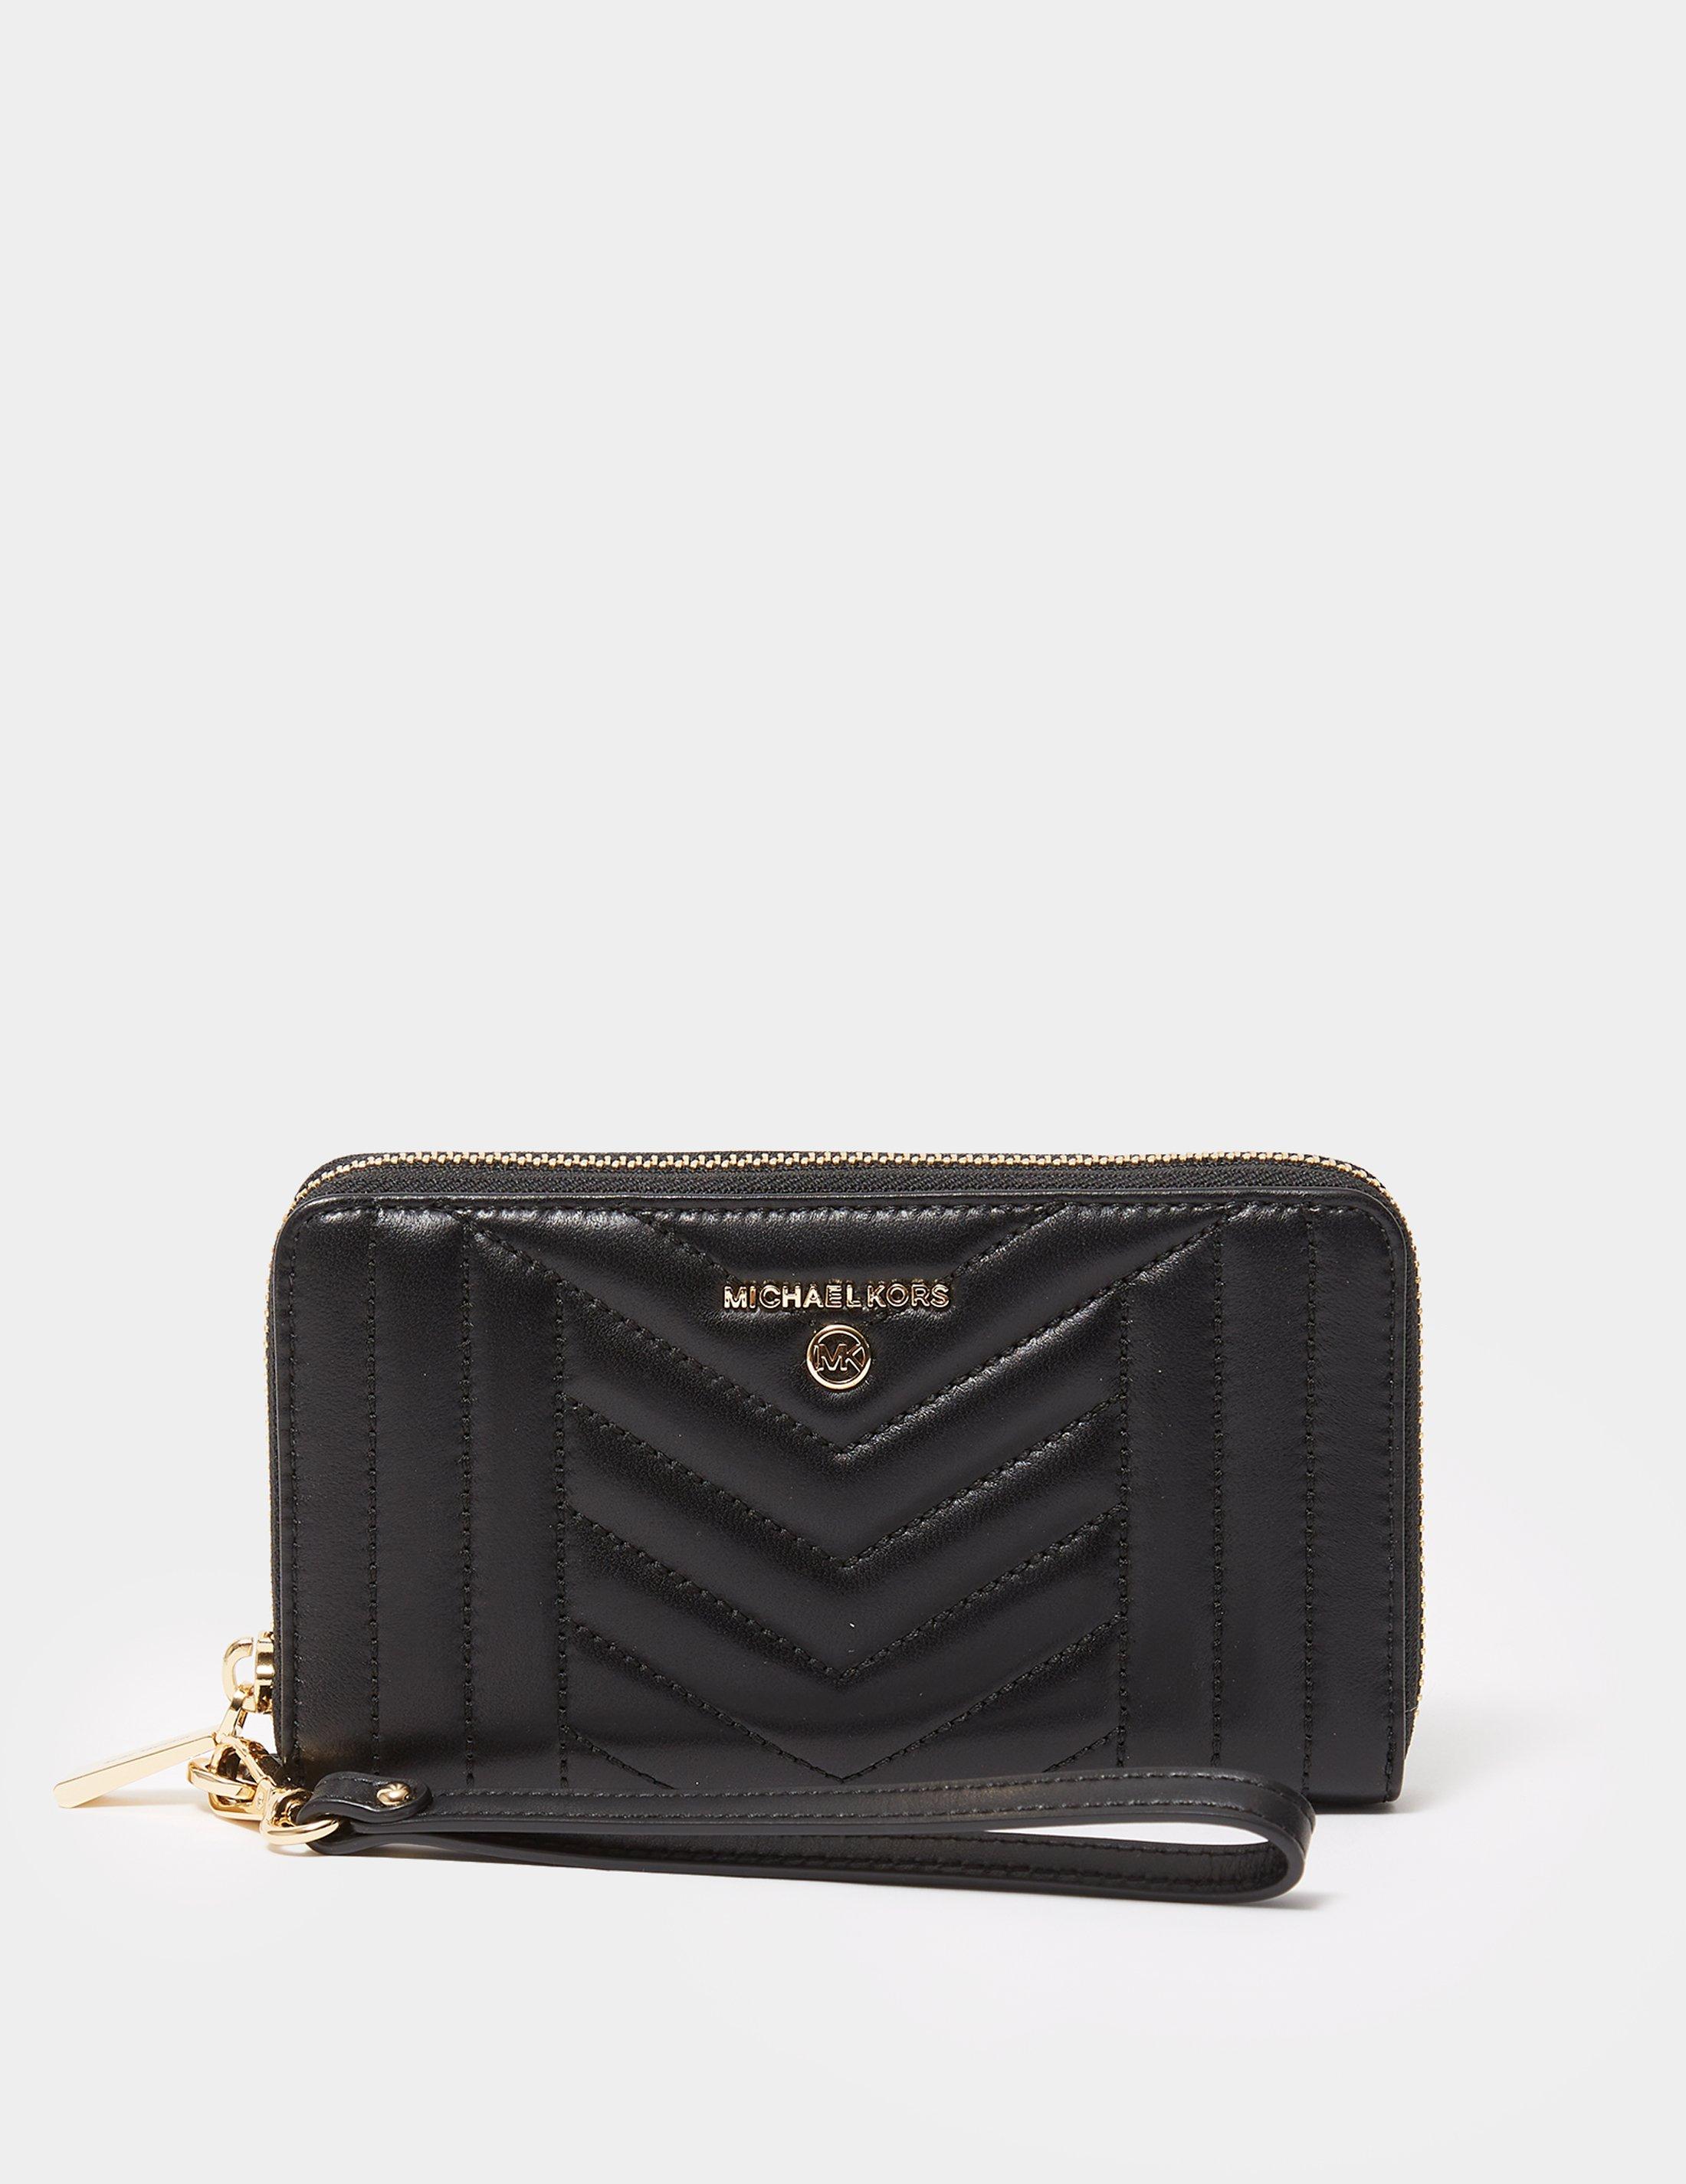 michael kors black quilted wallet